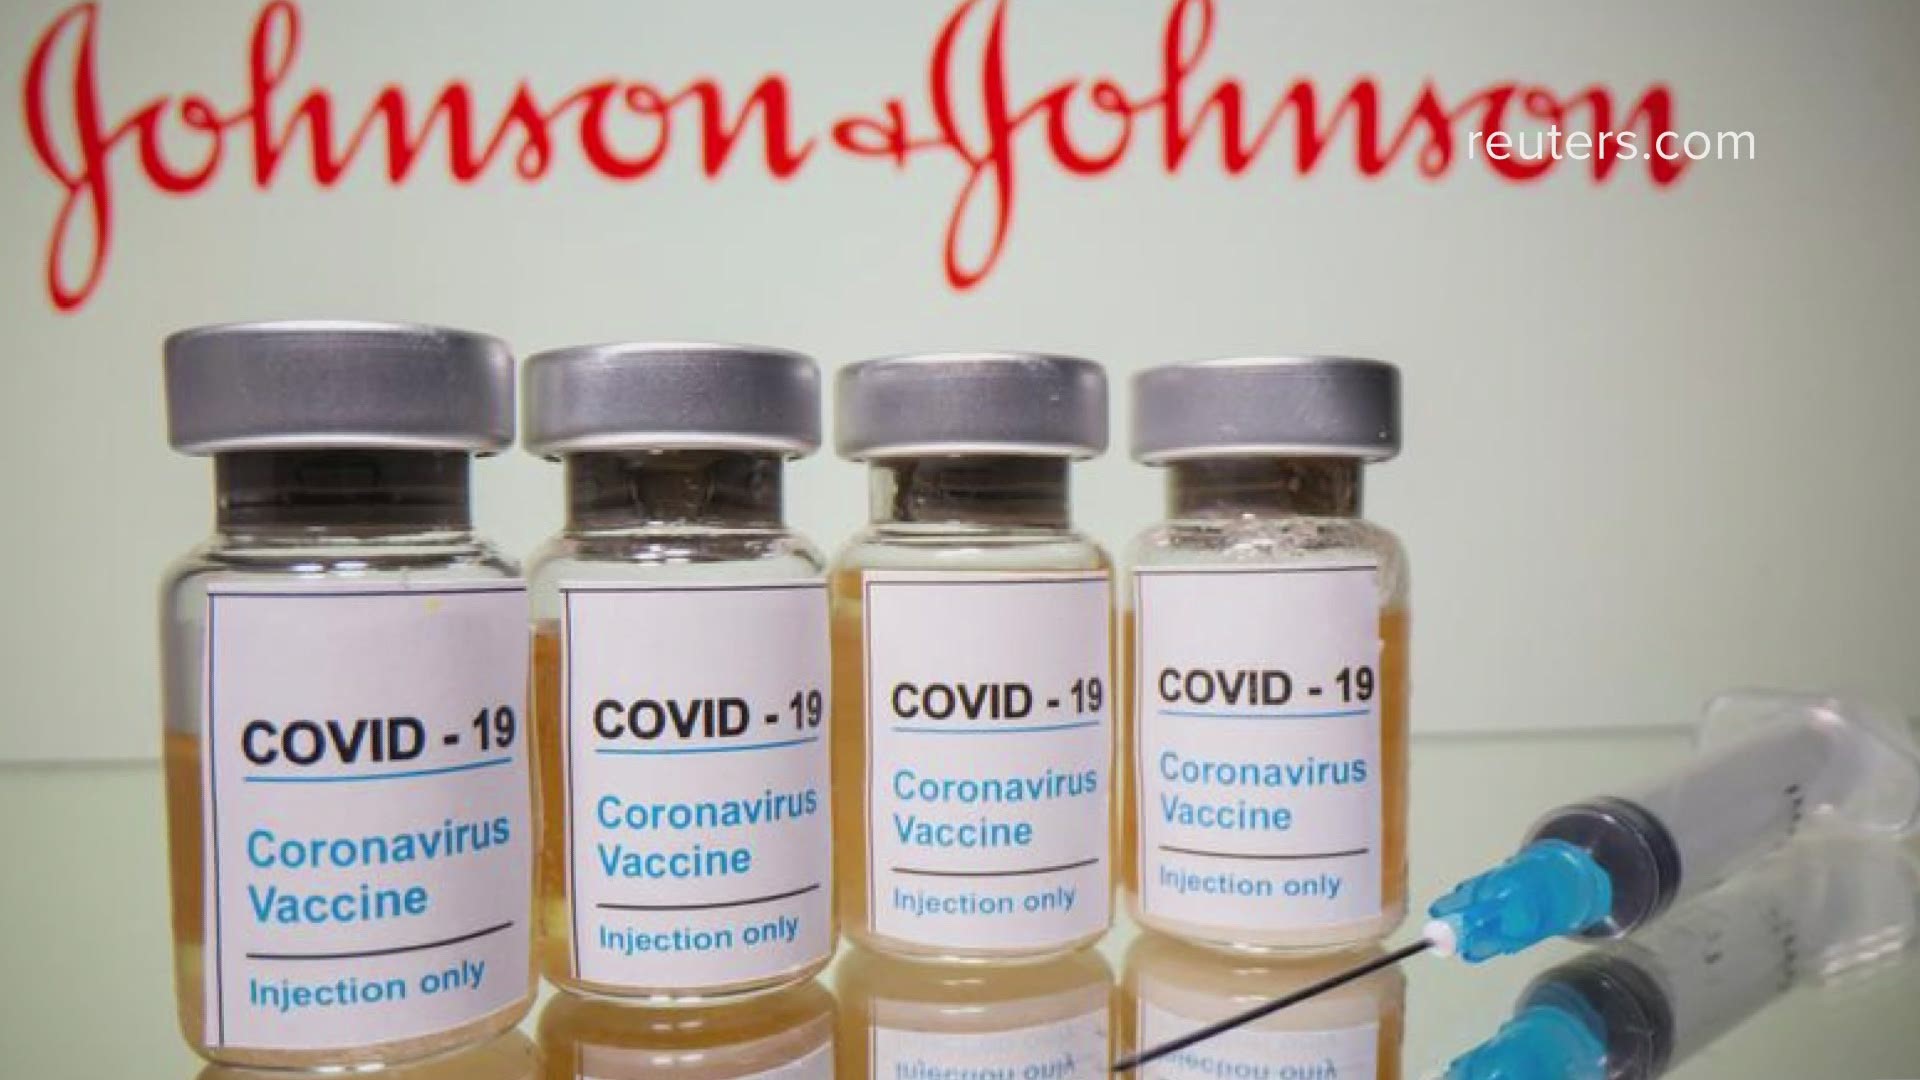 FDA has approved the one dose Johnson and Johnson covid vaccine.